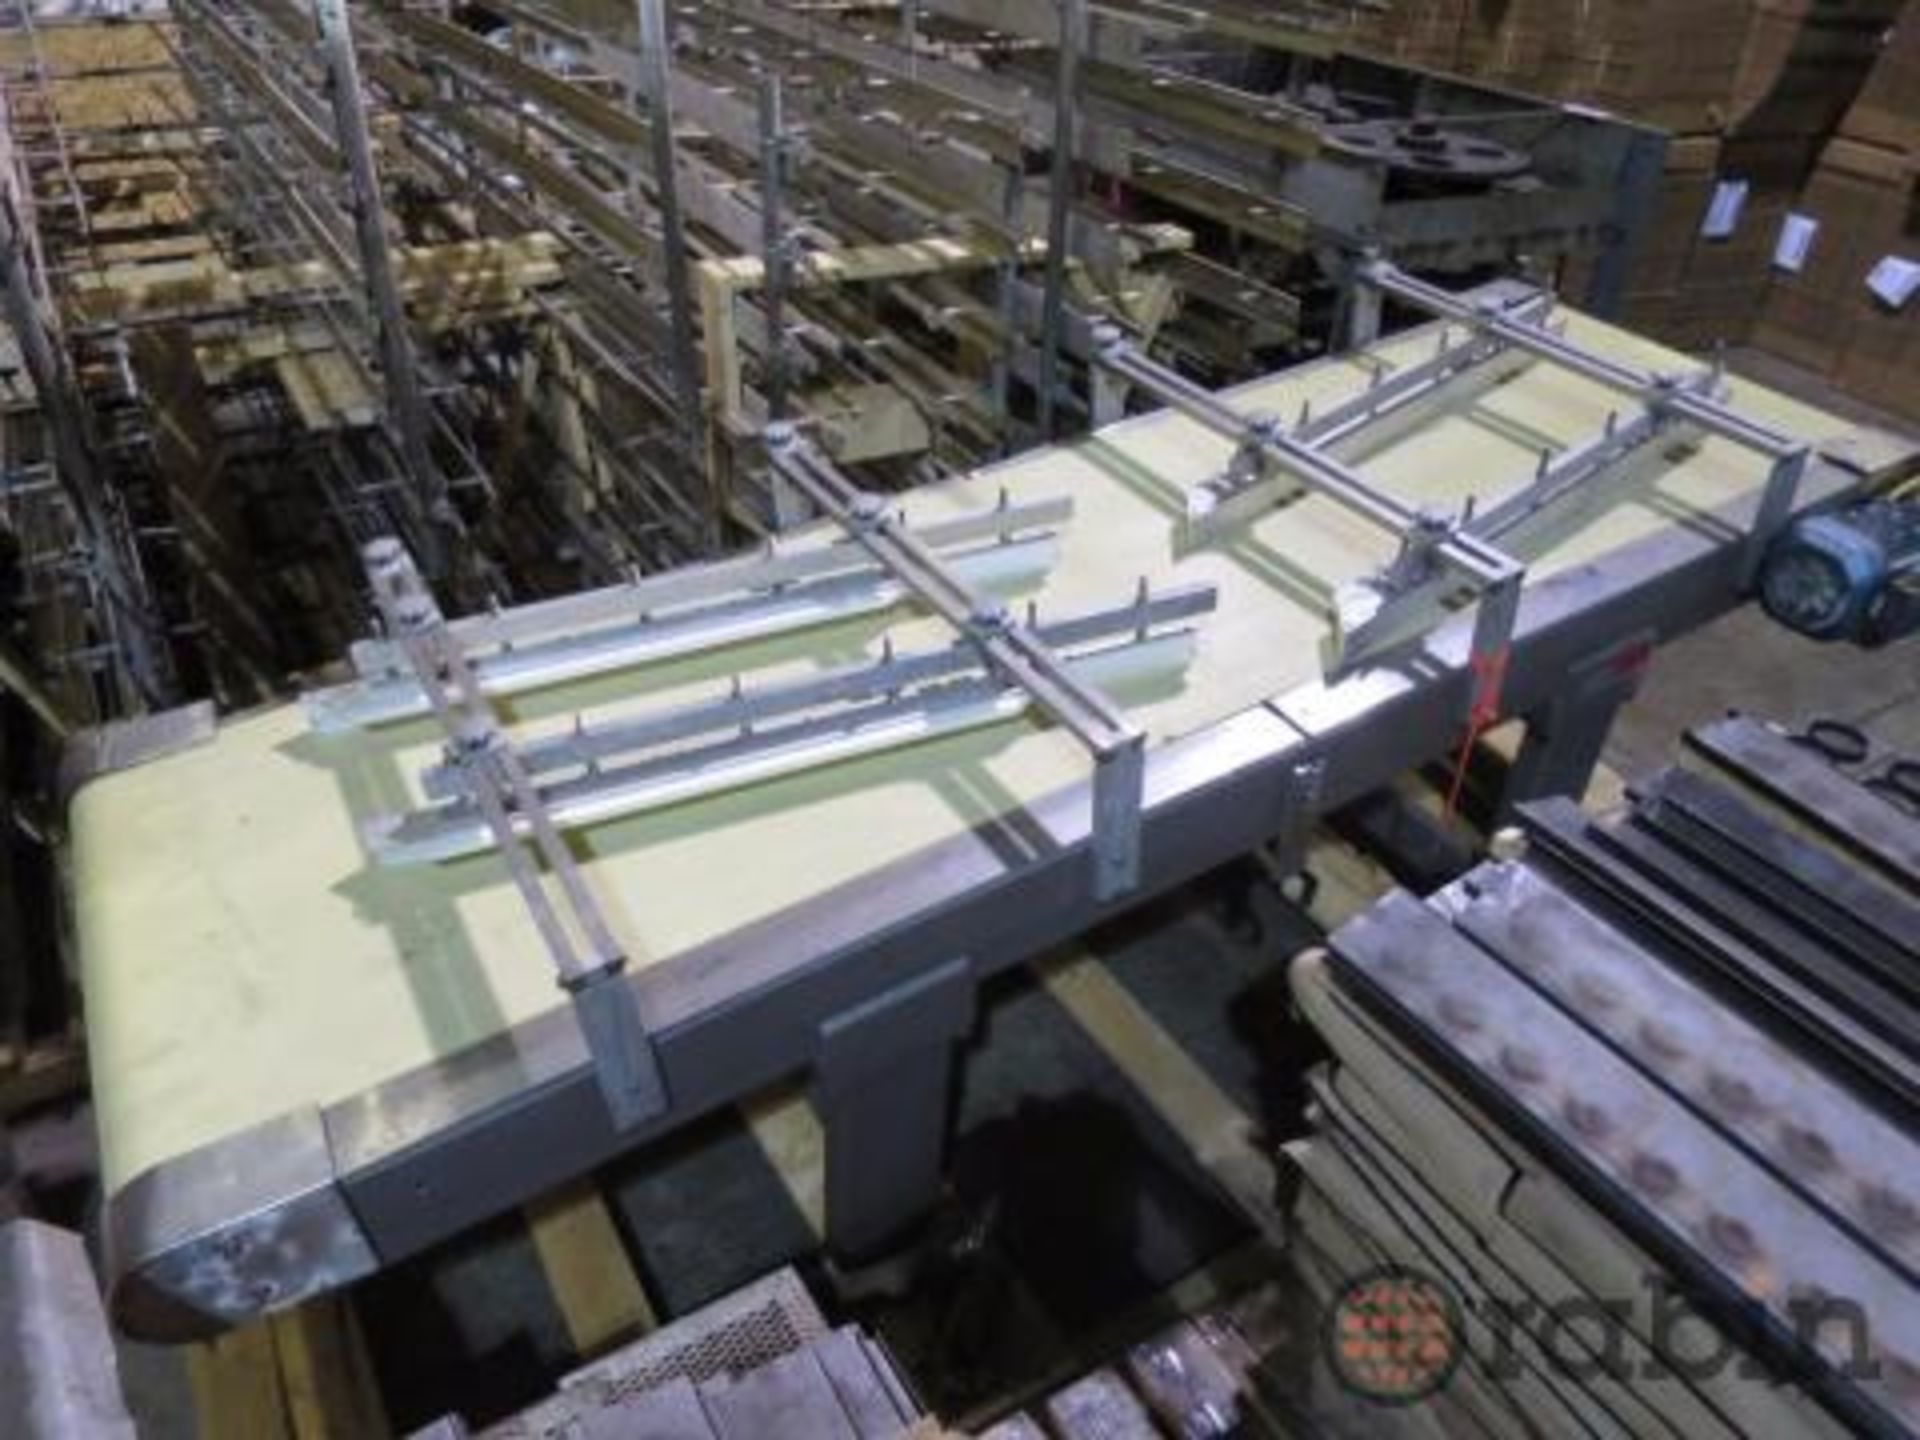 AMF model ADD bread divider, s/n 99183, roller frame, AB PanelView controller, with model DL-CH 4 - Image 5 of 7